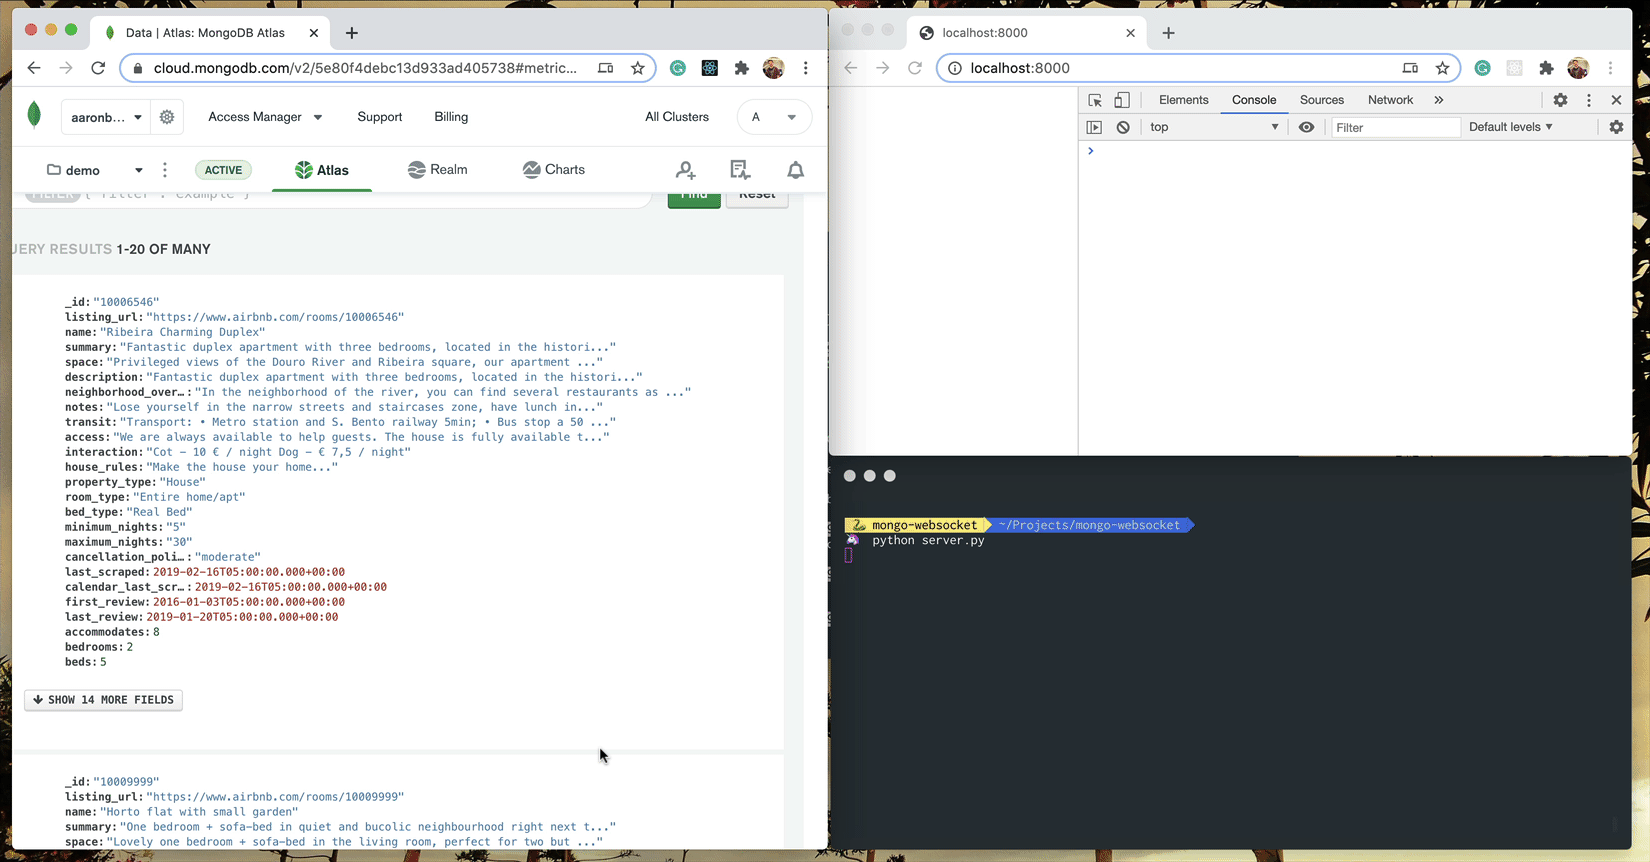 Screencast showing change being sent in real-time via a WebSocket